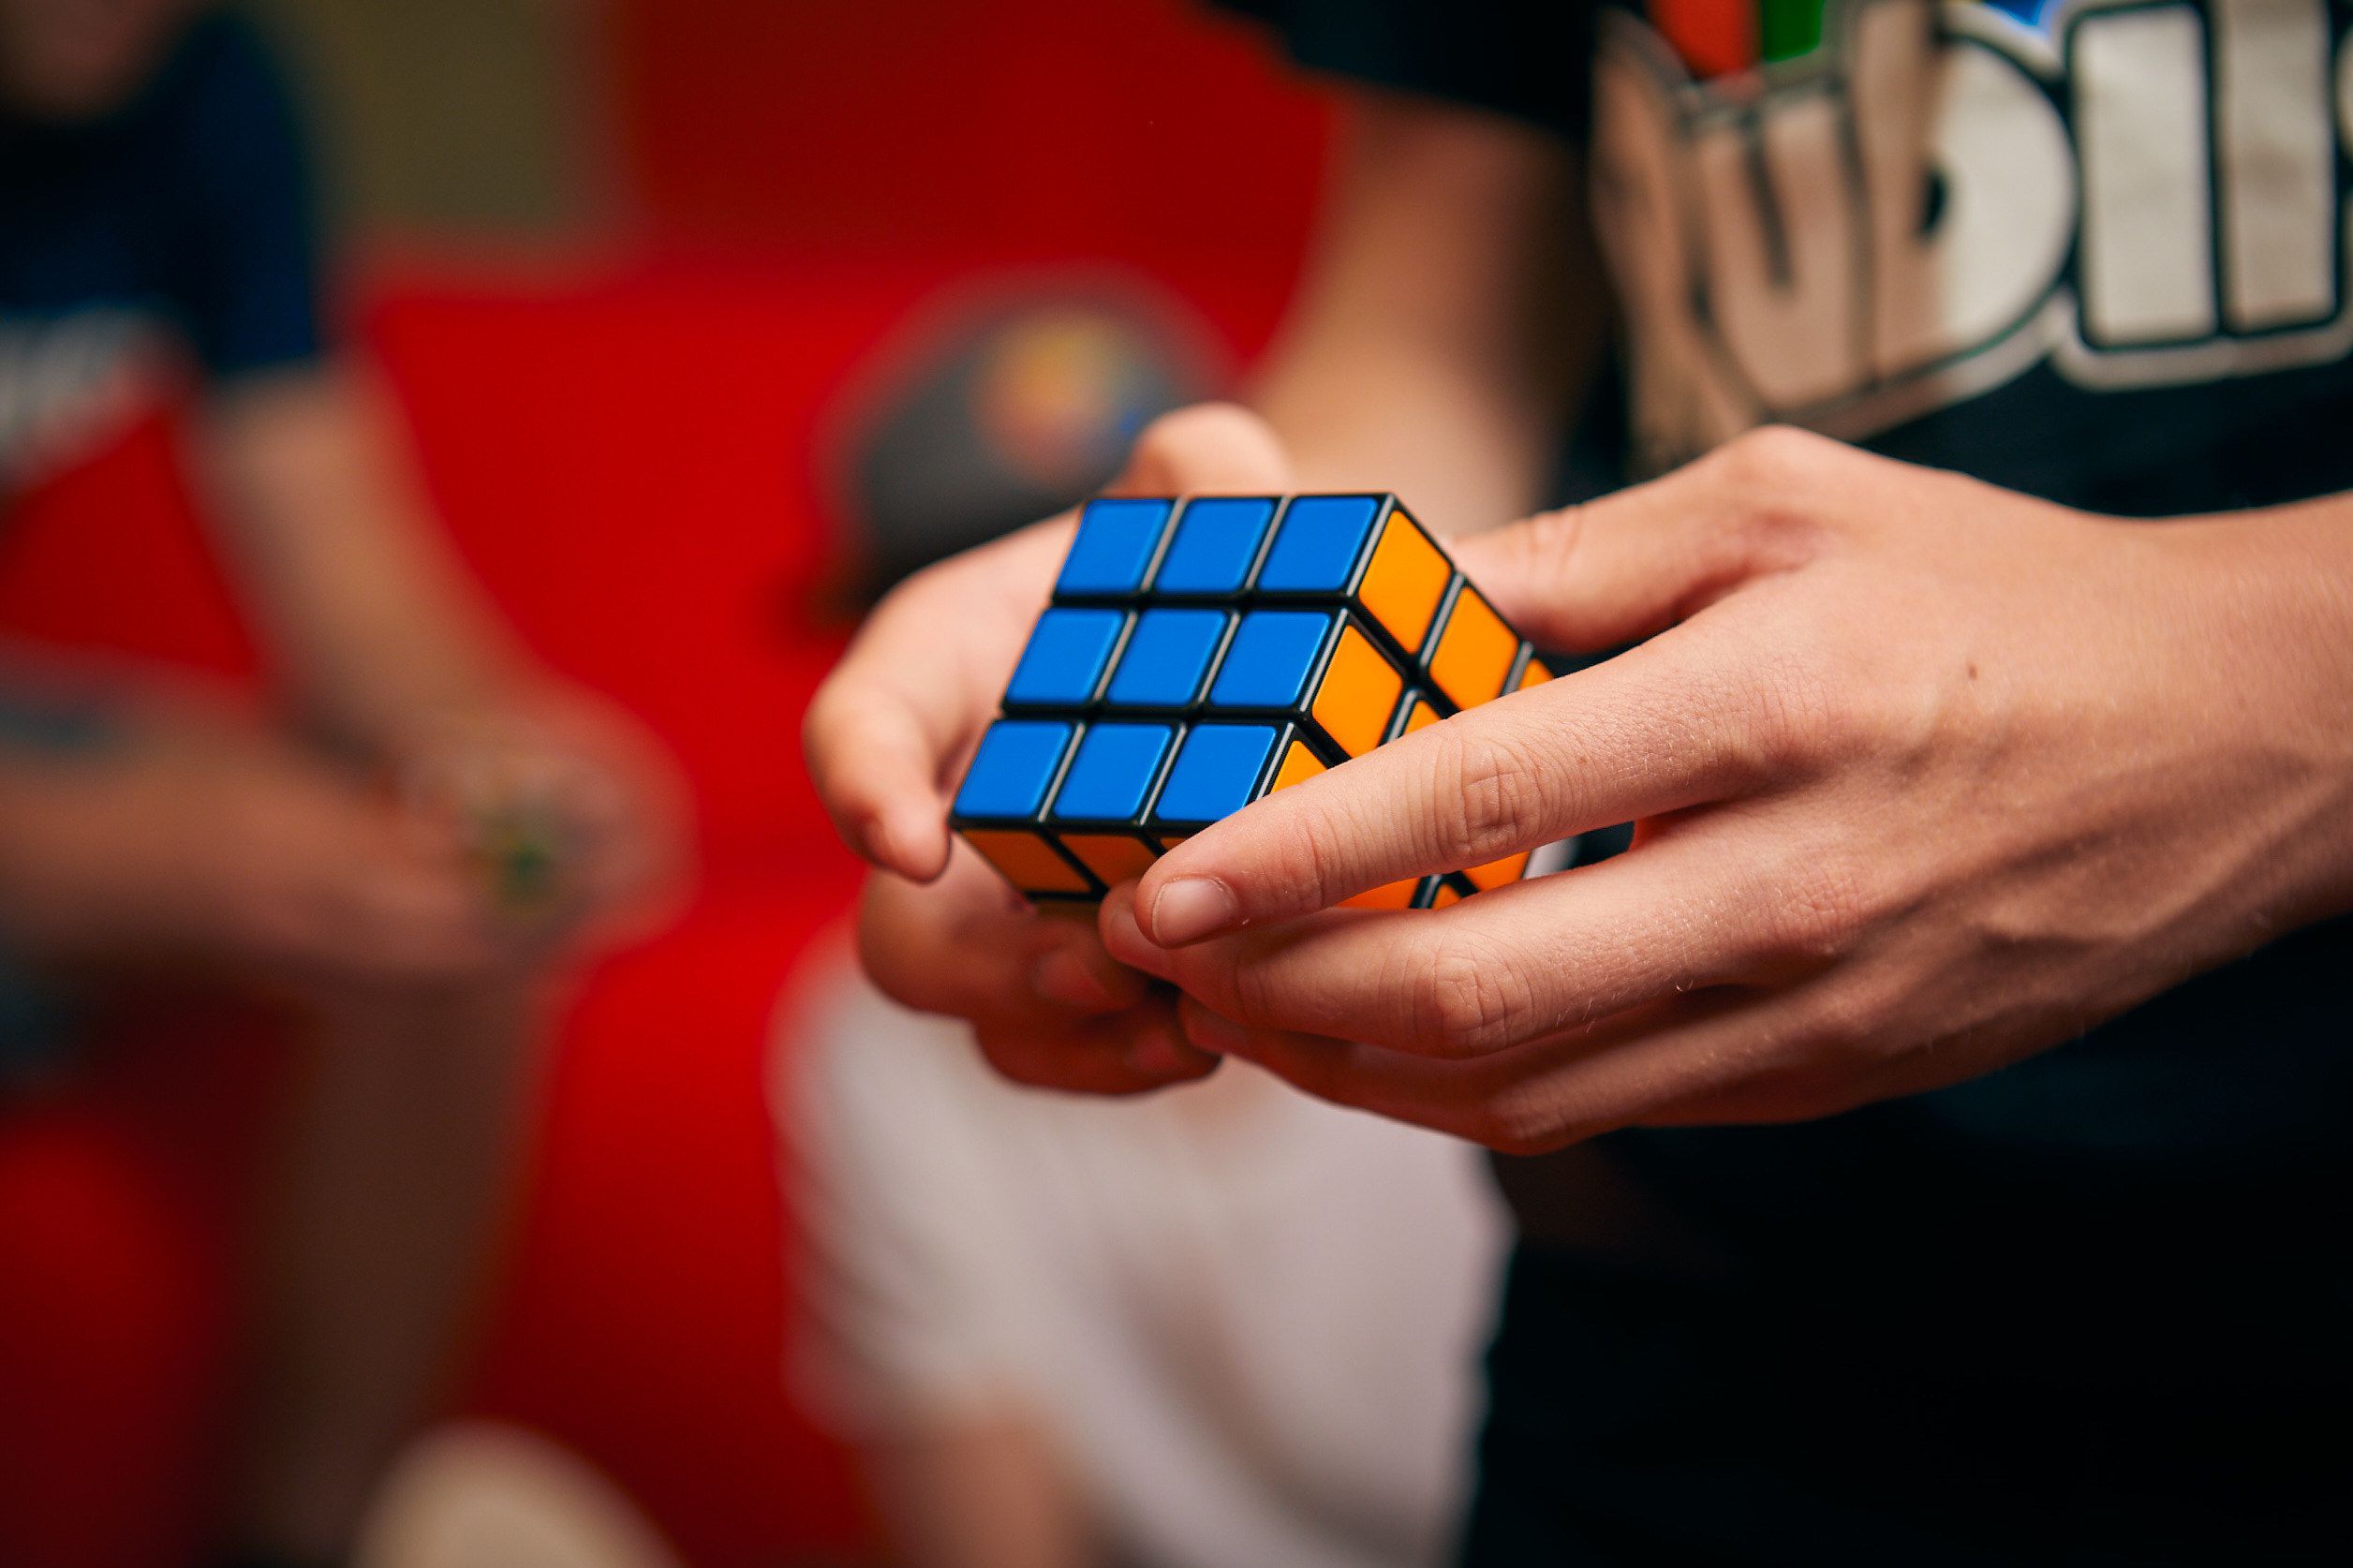 We've been trying to figure out Rubik's Cube for 40 years